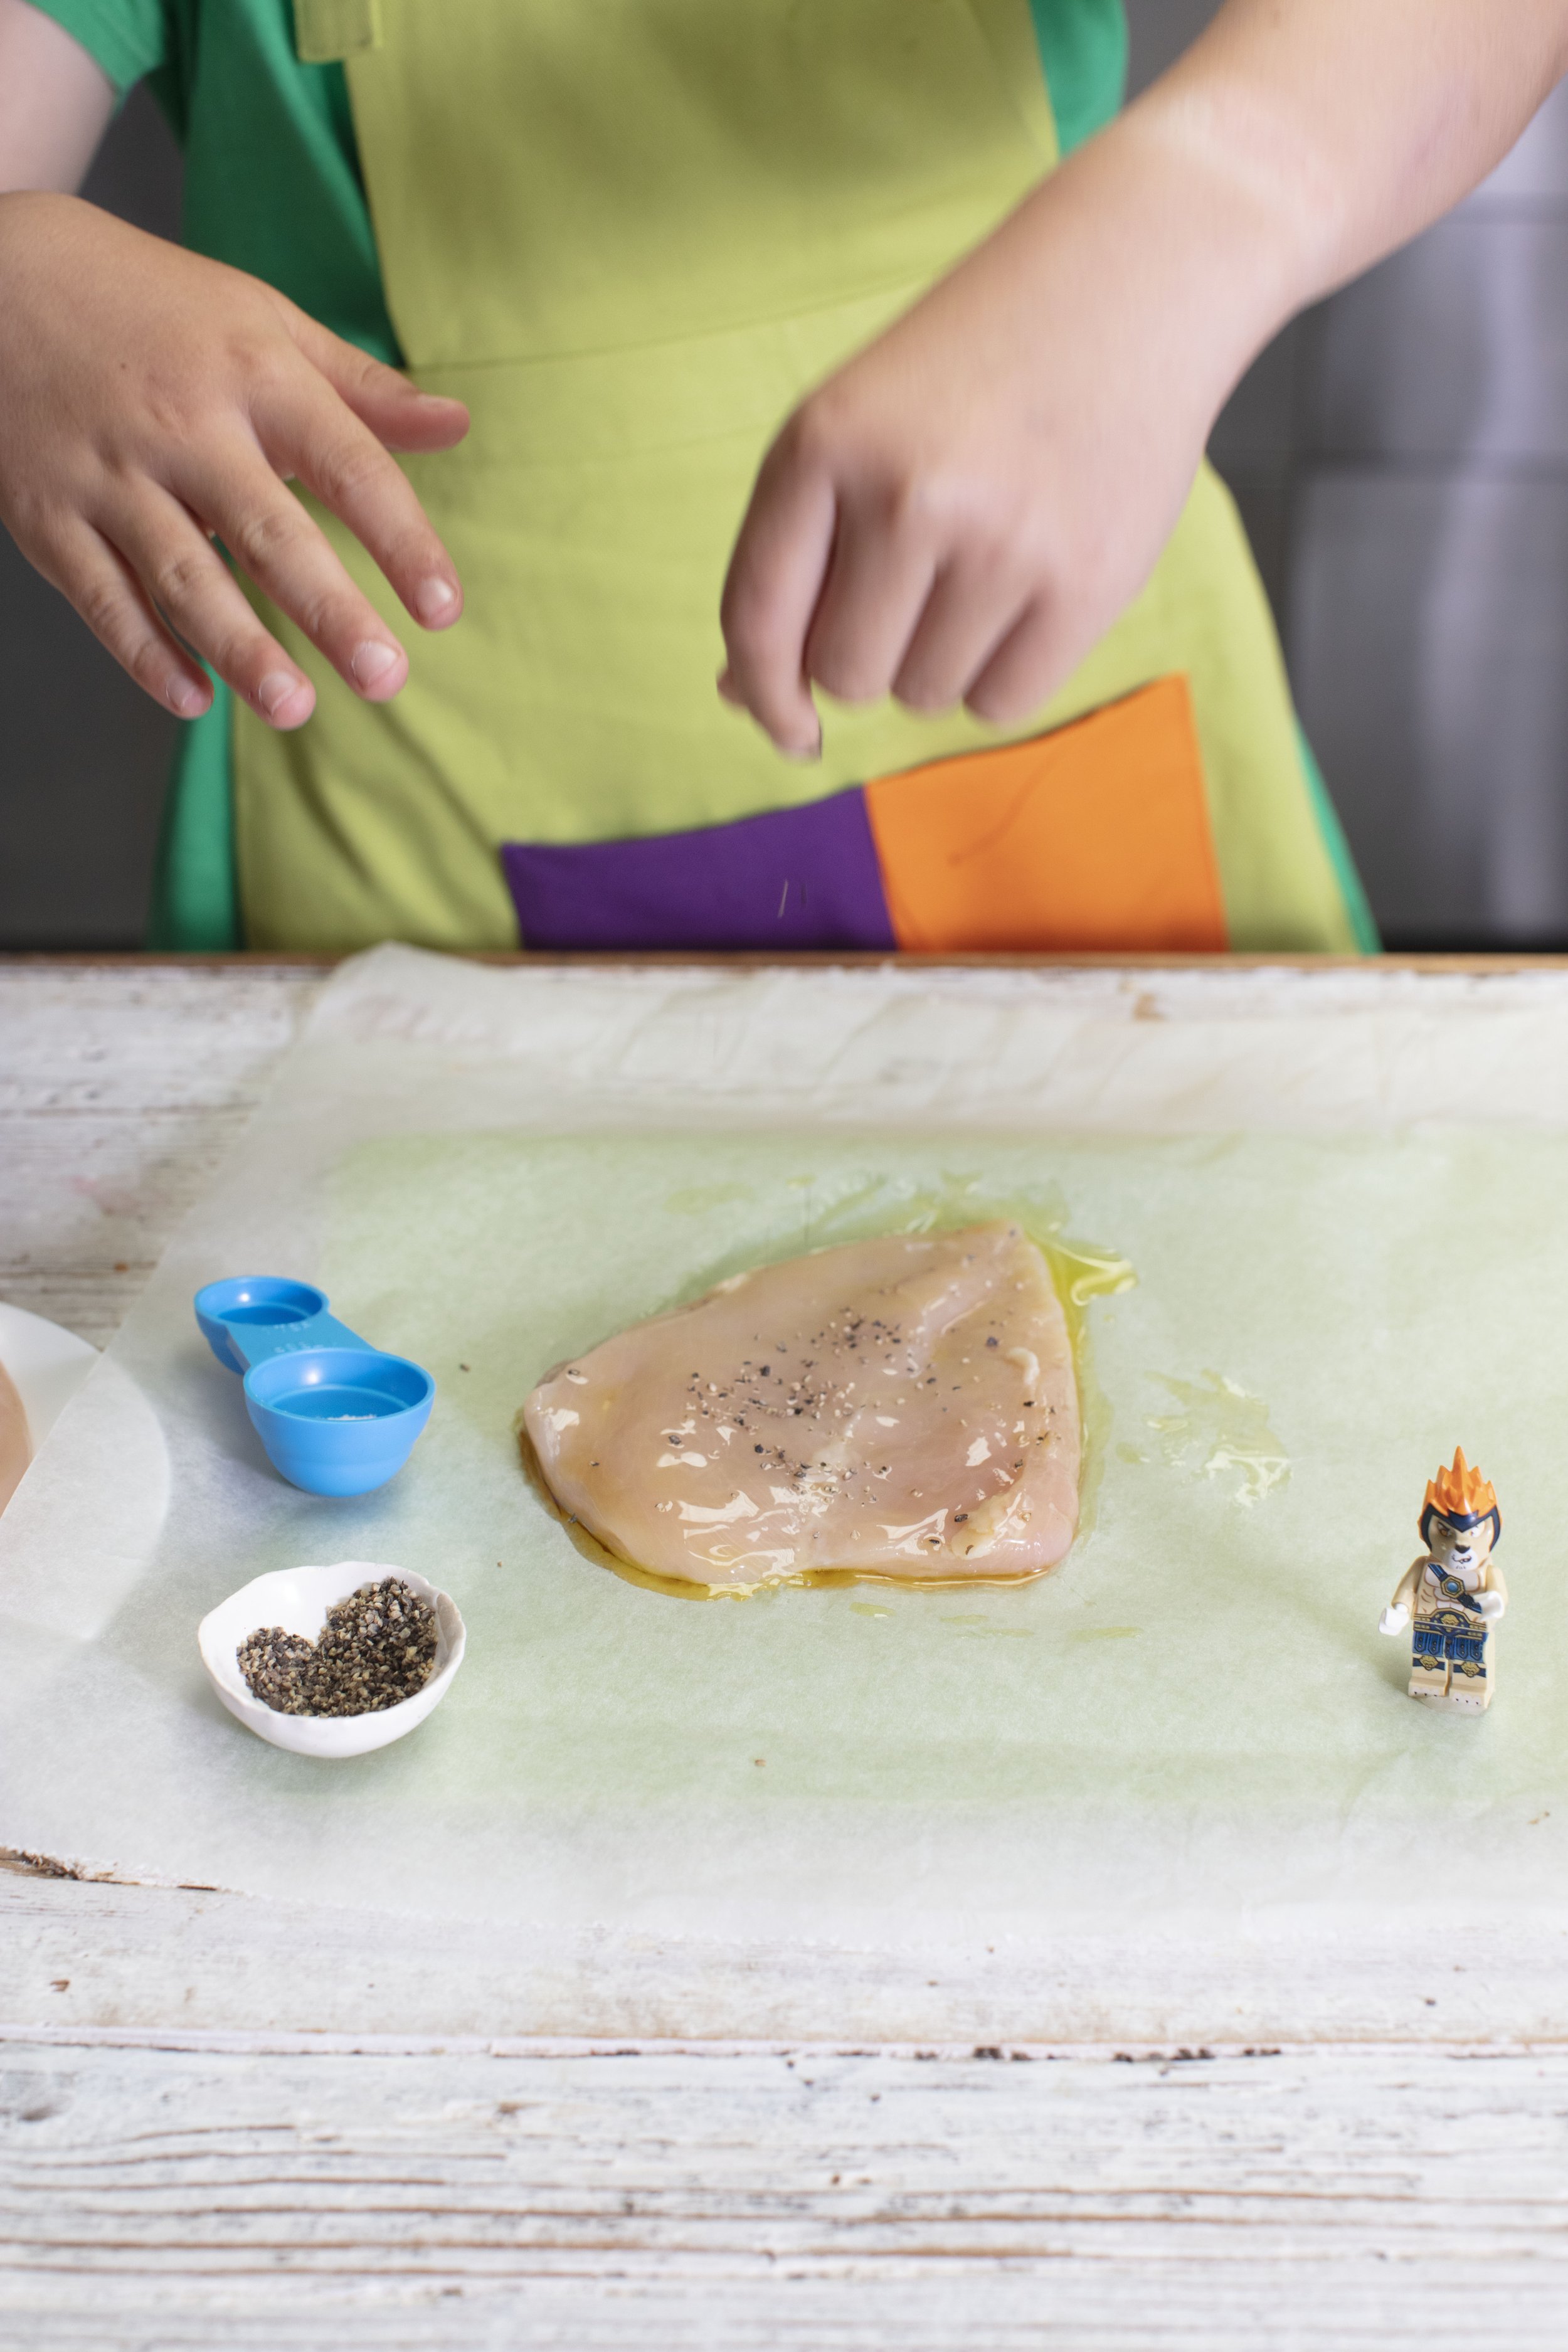 boy with green apron is seasoning the bashed chicken